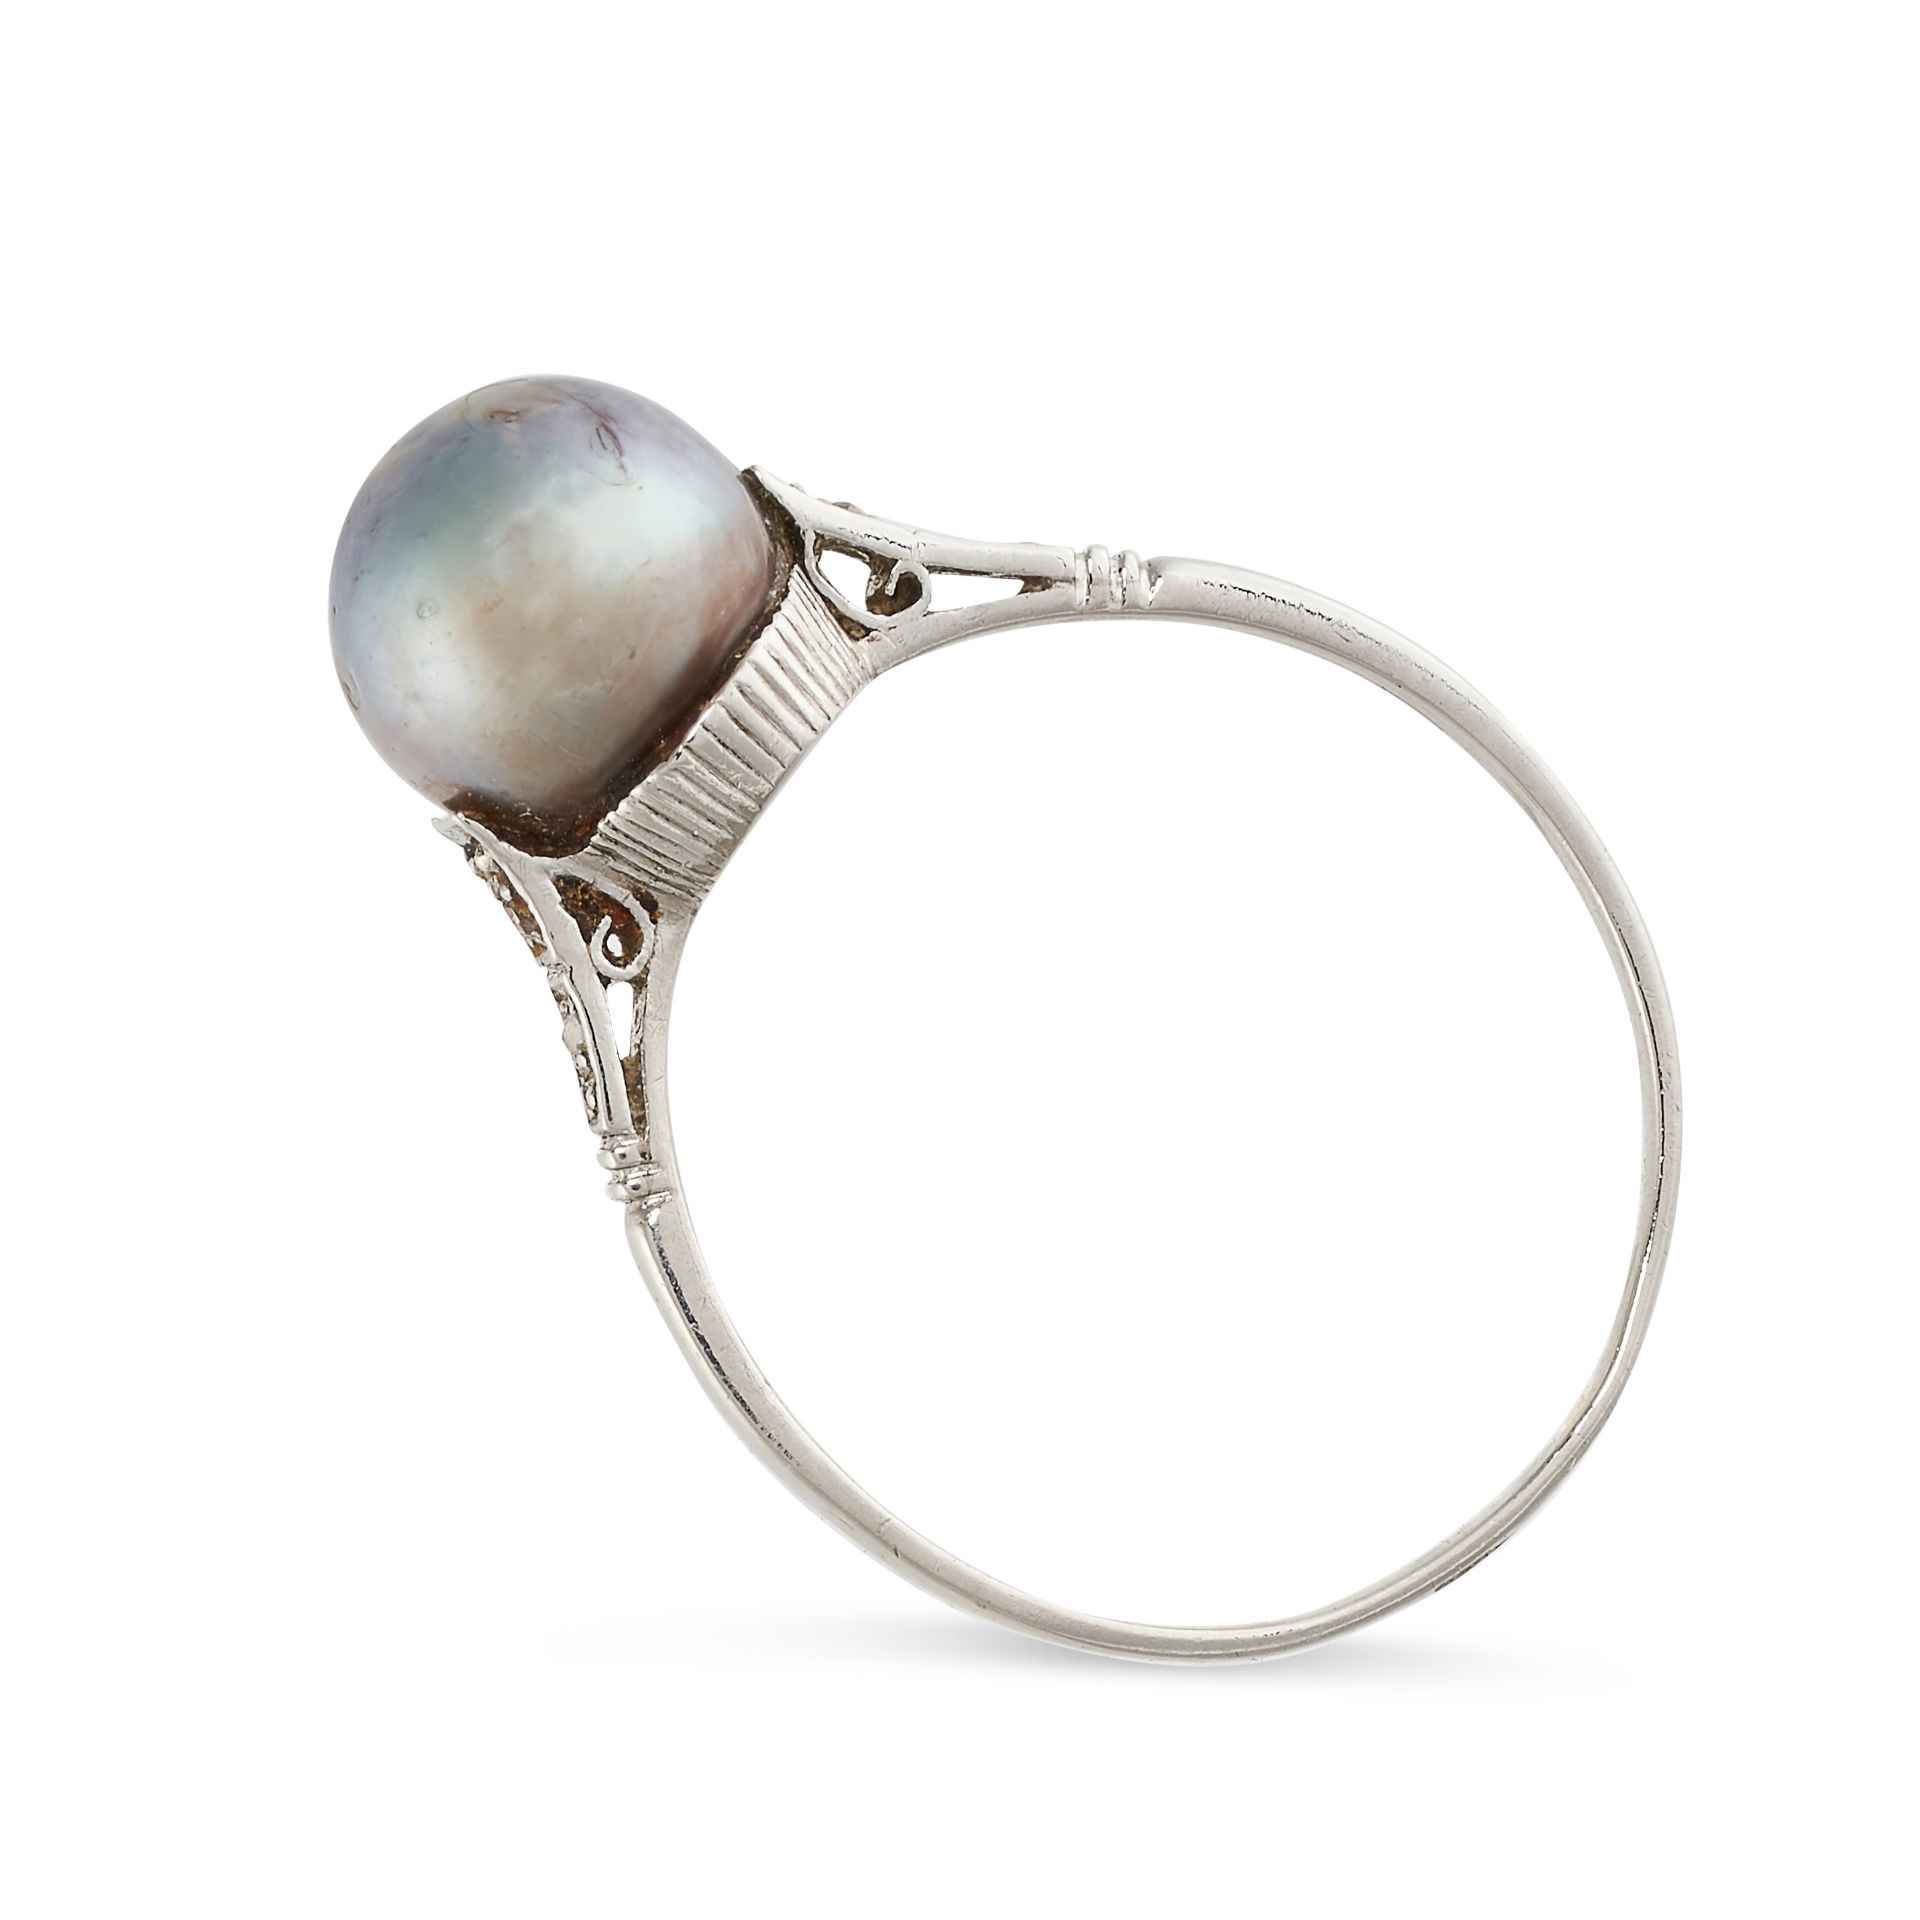 NO RESERVE - AN ART DECO PEARL AND DIAMOND RING set with a grey pearl of 8.7mm accented by rose - Image 2 of 2